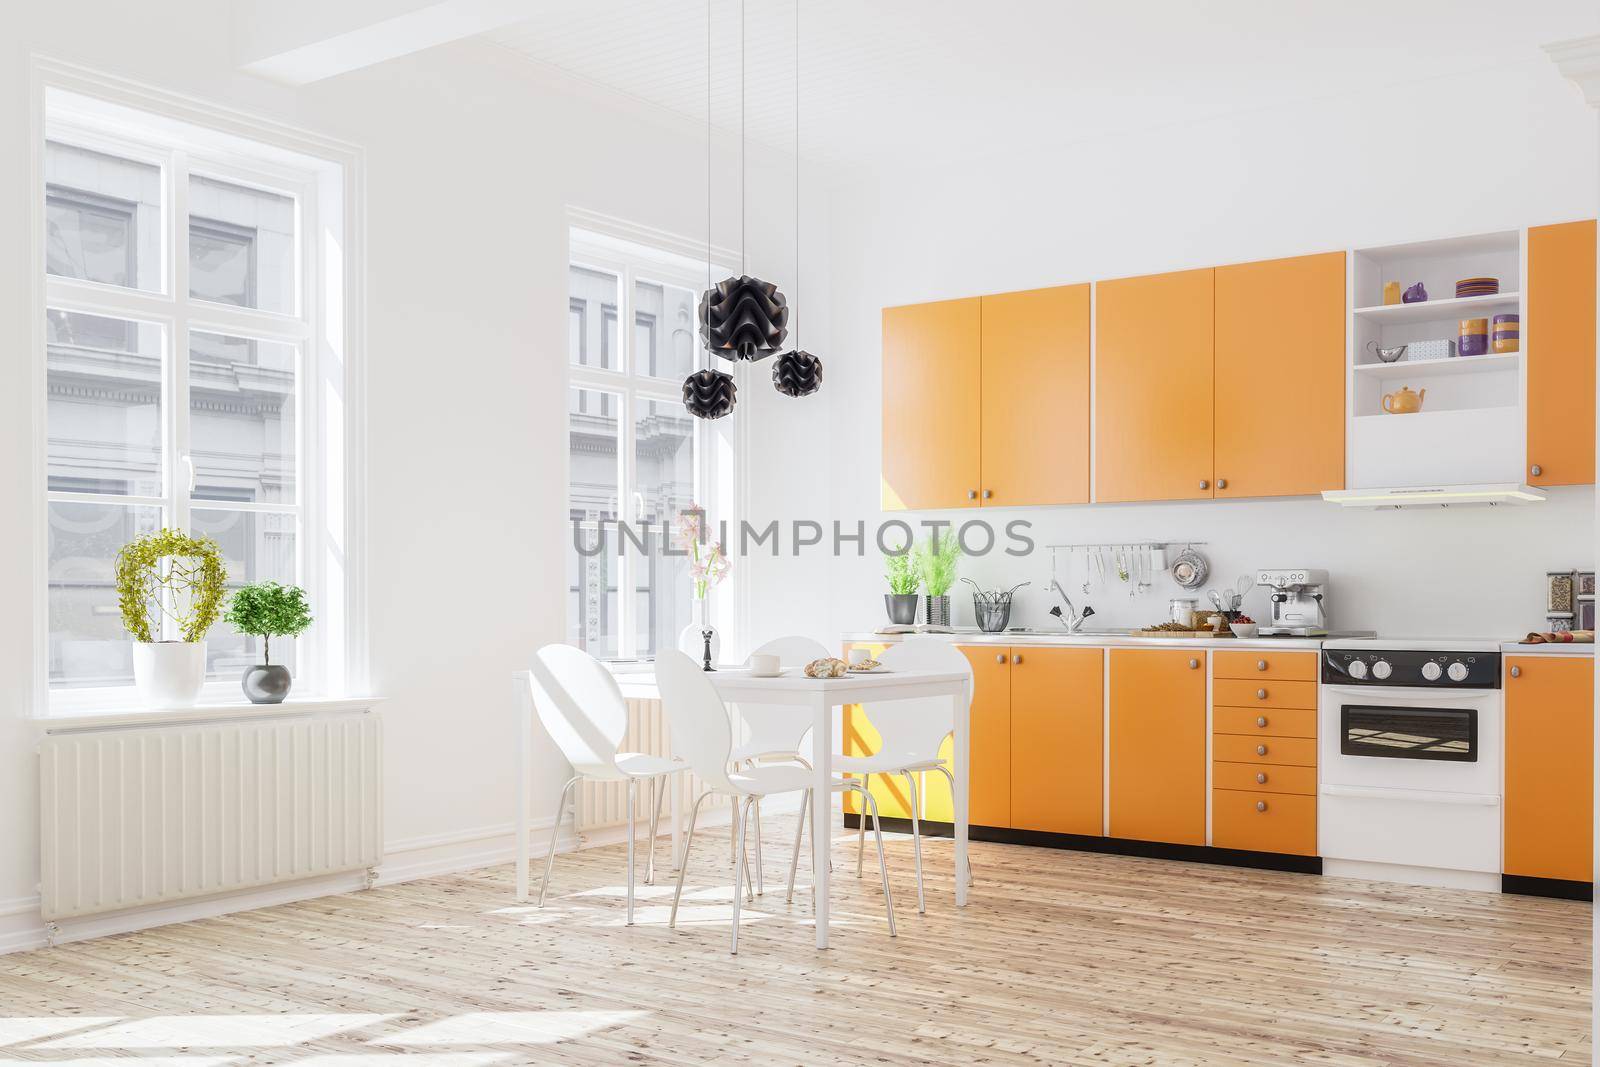 3d rendering of kitchen interior in modern home with dinner tabl by Kzenon